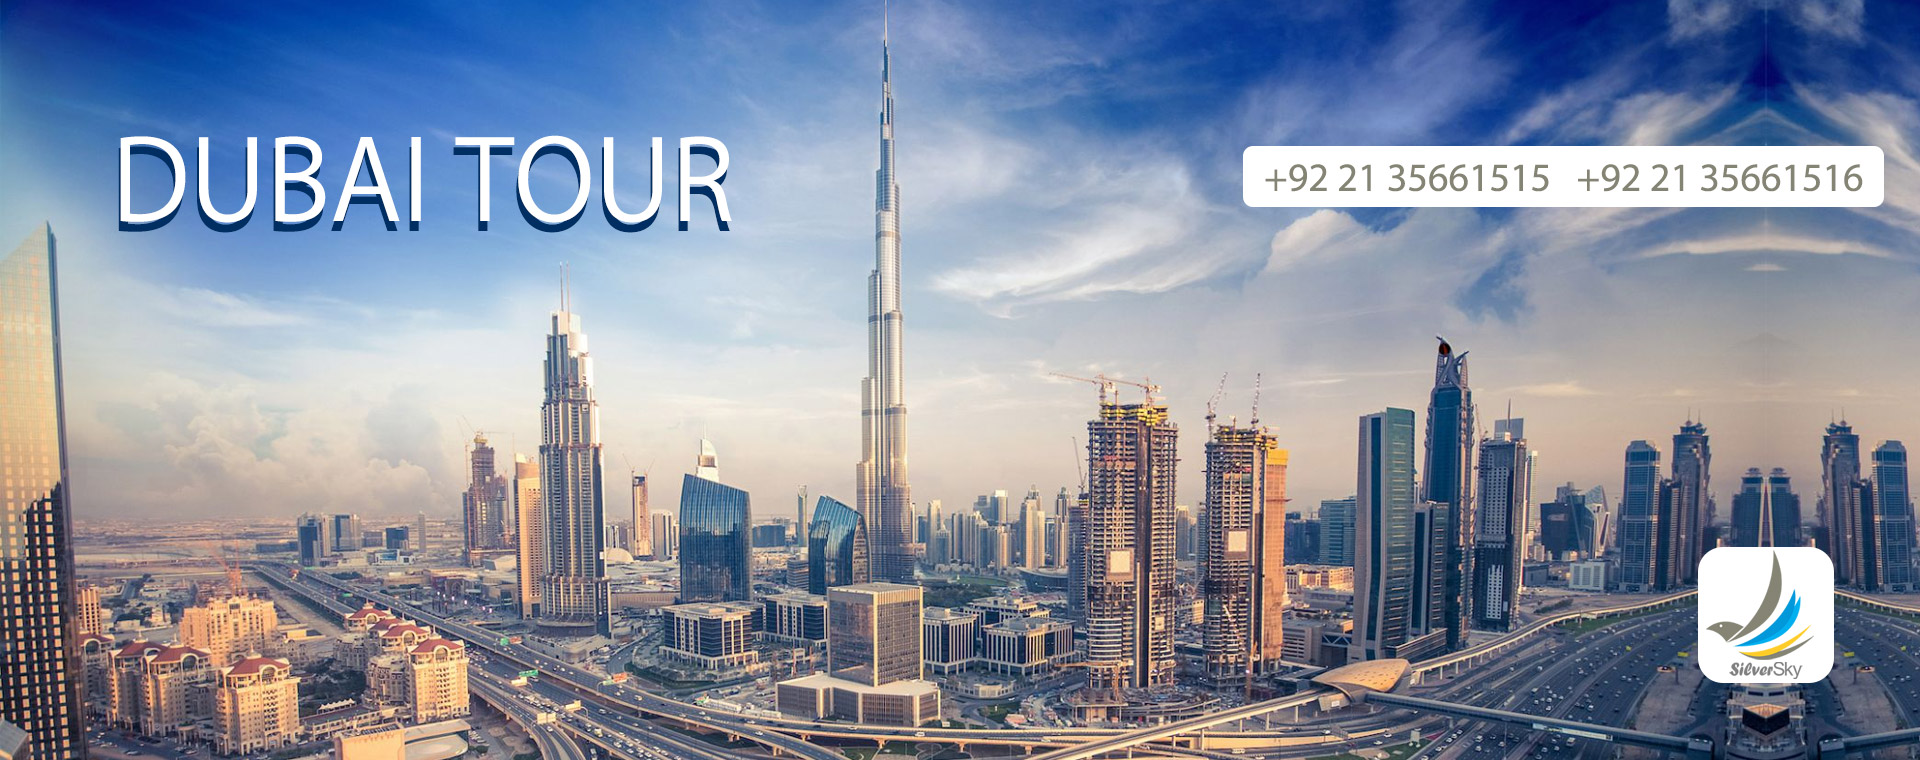 Dubai Tour by SilverSky Travel and Tourism